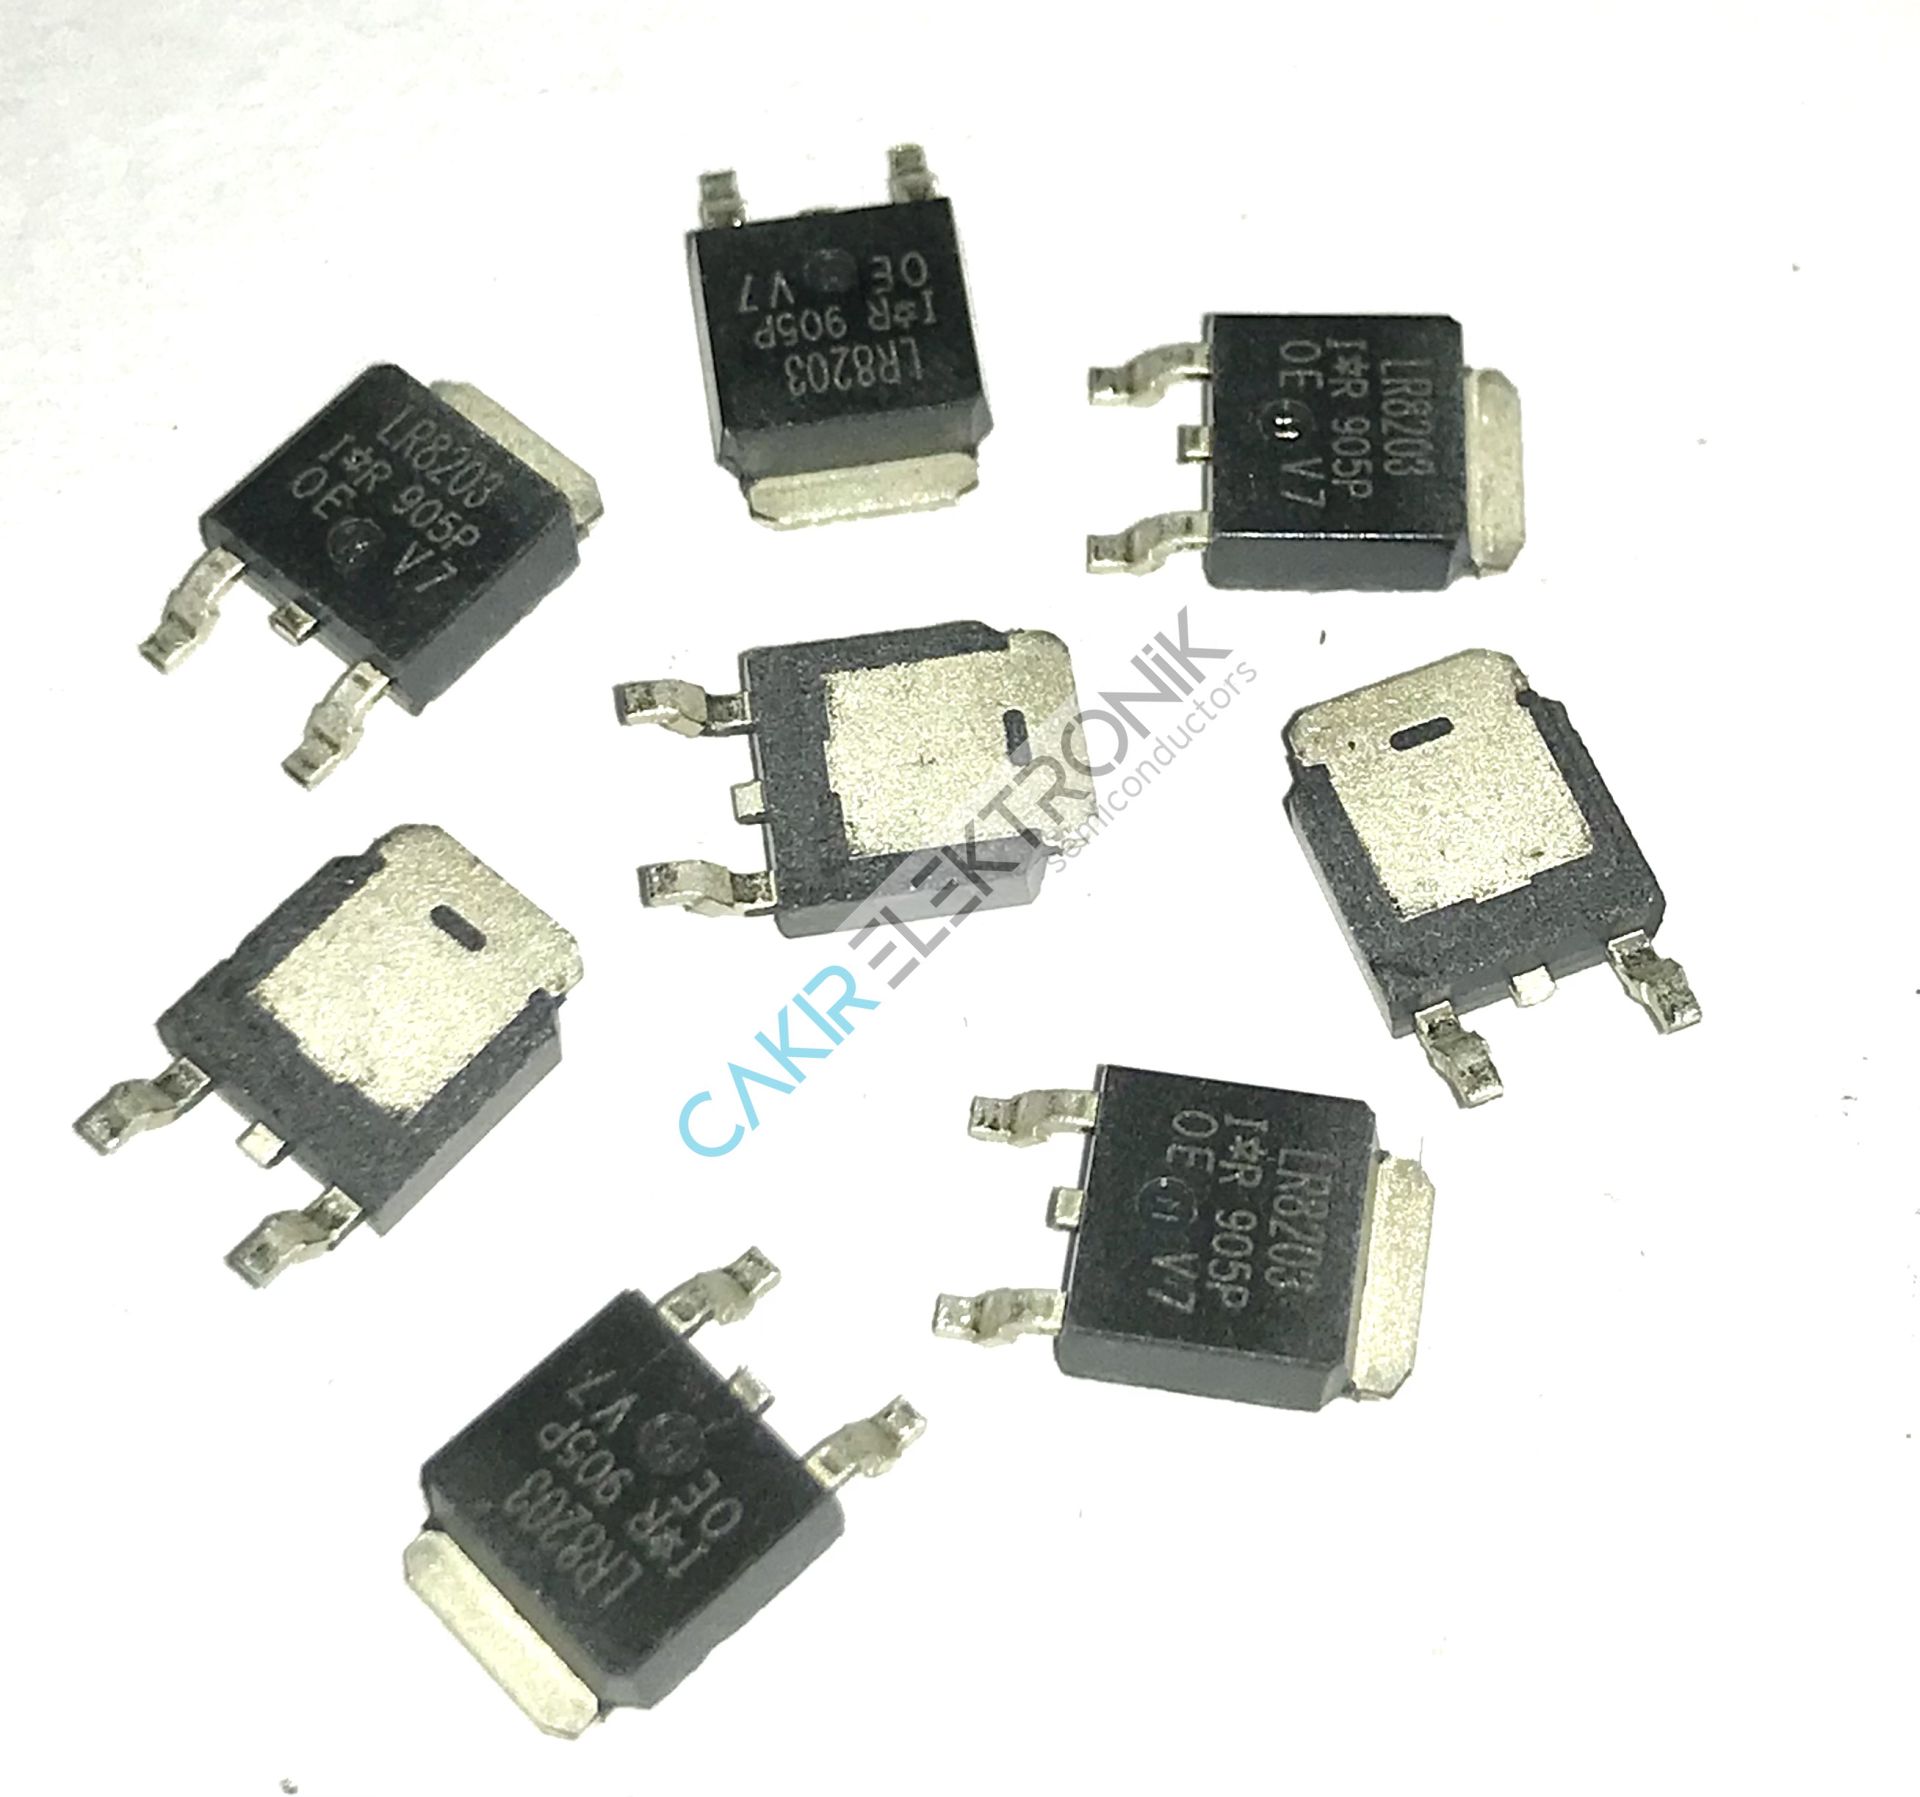 IRLR8203PBF - IRLR8203 - LR8203 TO252 30V 110A 140W N-Channel HEXFET Power MOSFET-IR